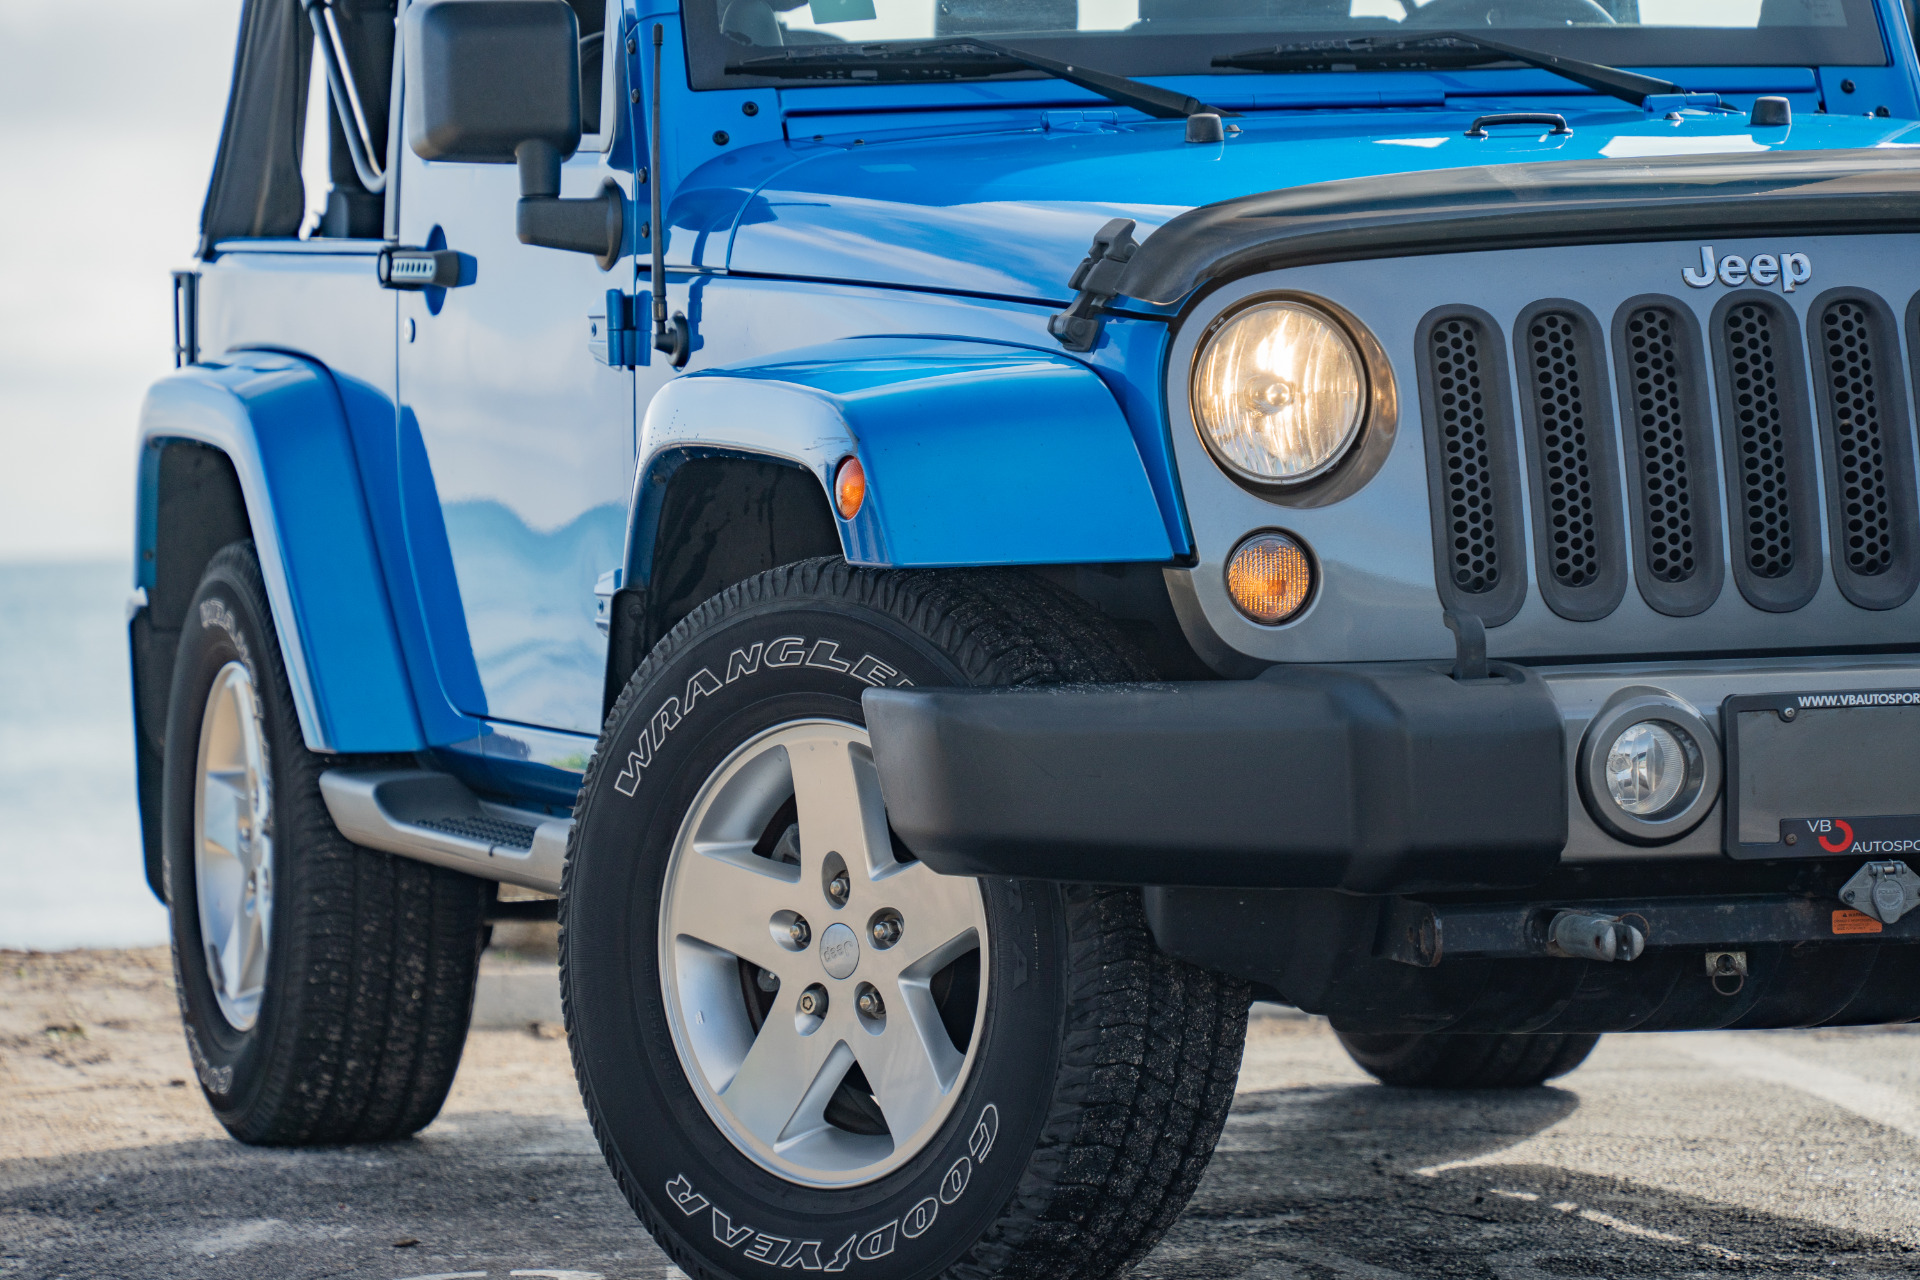 Pre-Owned 2014 Jeep Wrangler Freedom Edition For Sale (Sold) | VB  Autosports Stock #VB307A